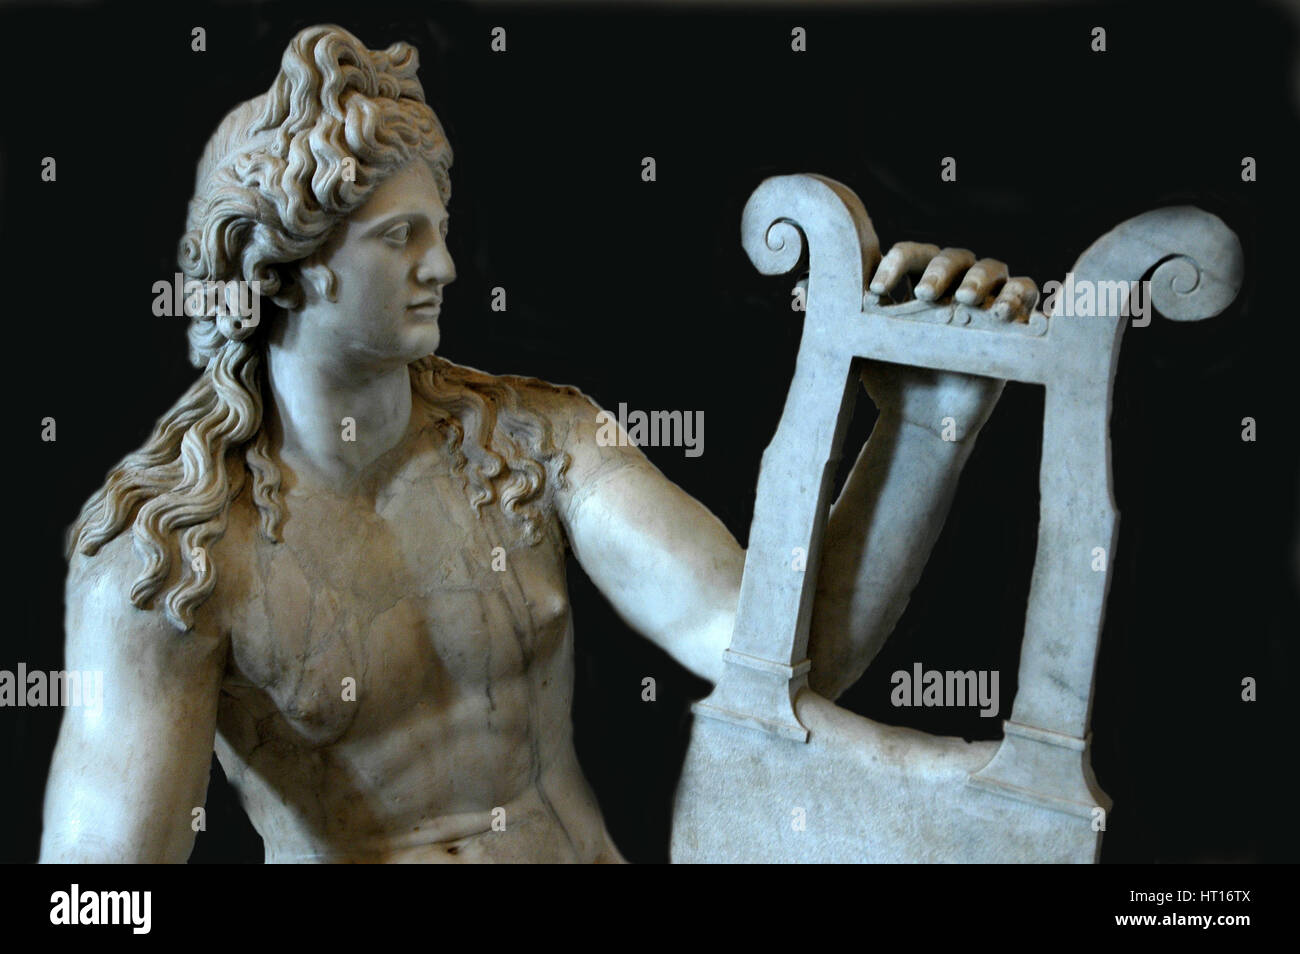 Apollo the Lyrist or Citharoedus. The statue's style references a myth recounted in Ovid's Metamorph Artist: Werner Forman. Stock Photo